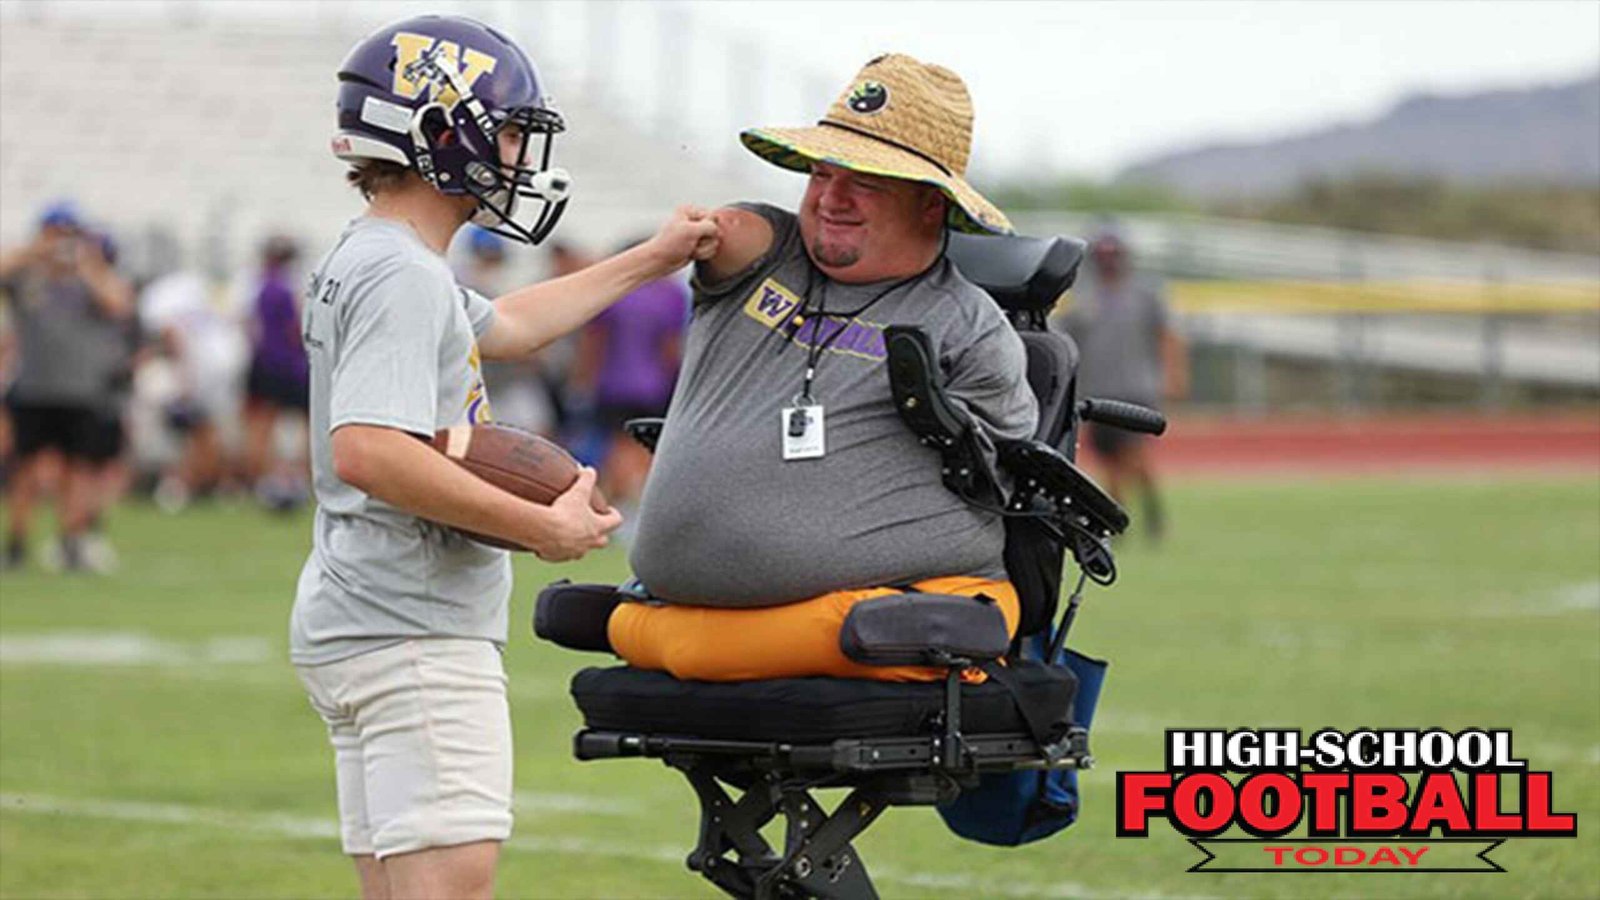 Ray High School Football Welcome Head Coach born without limbs